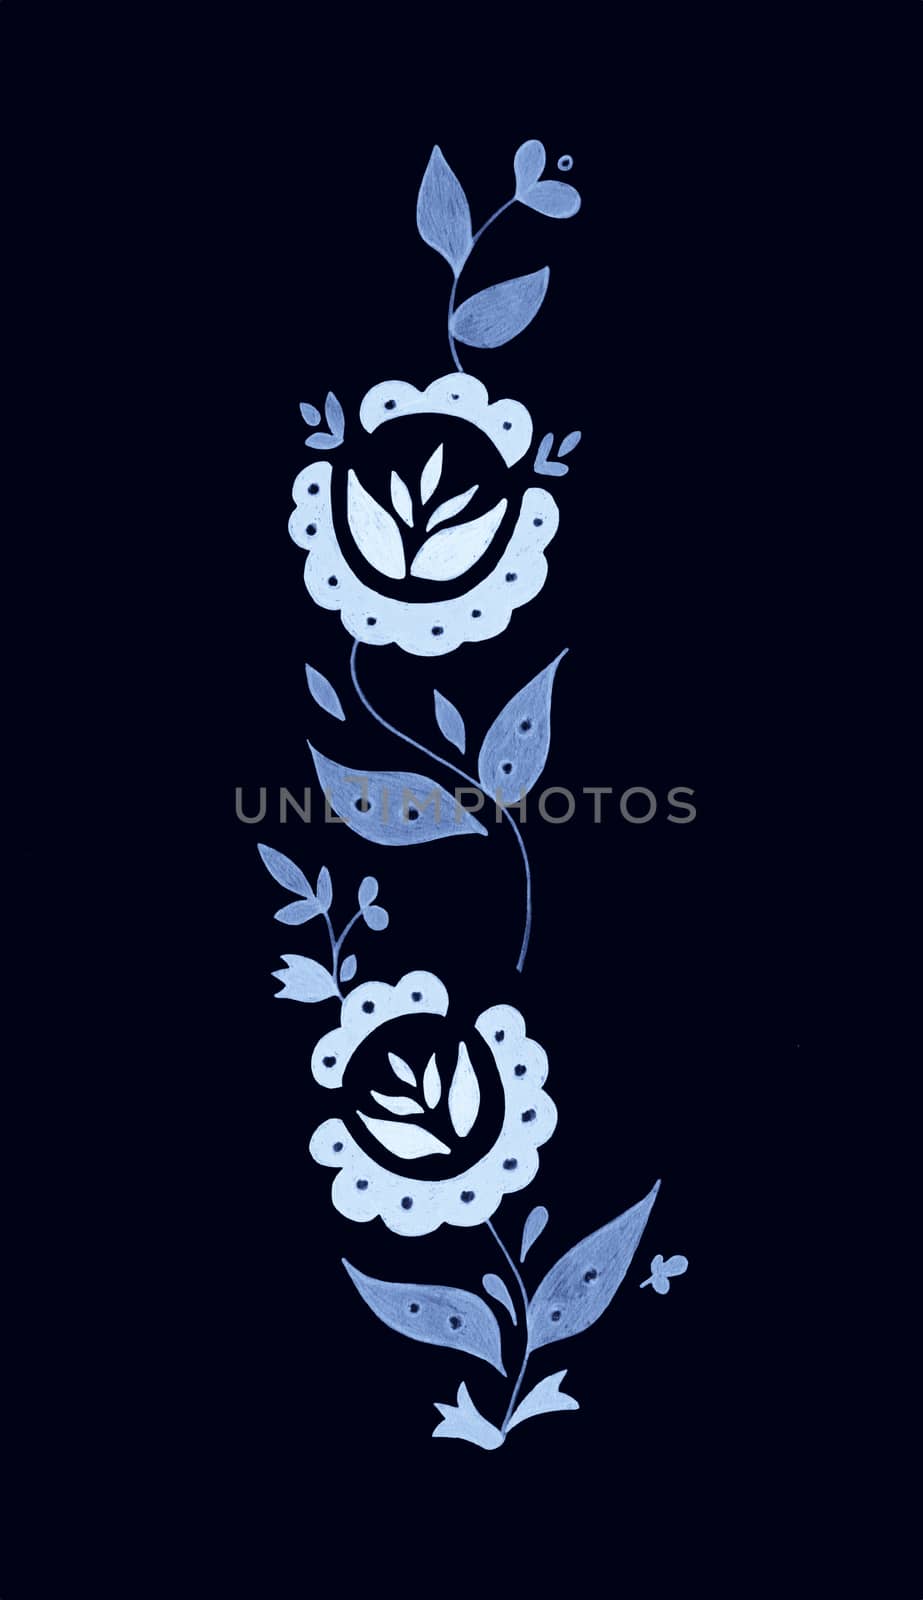 Decorative composition of abstract doodle flowers and leaves. Floral motif illustration. Design element. Hand drawn vertical ornament isolated on white background.